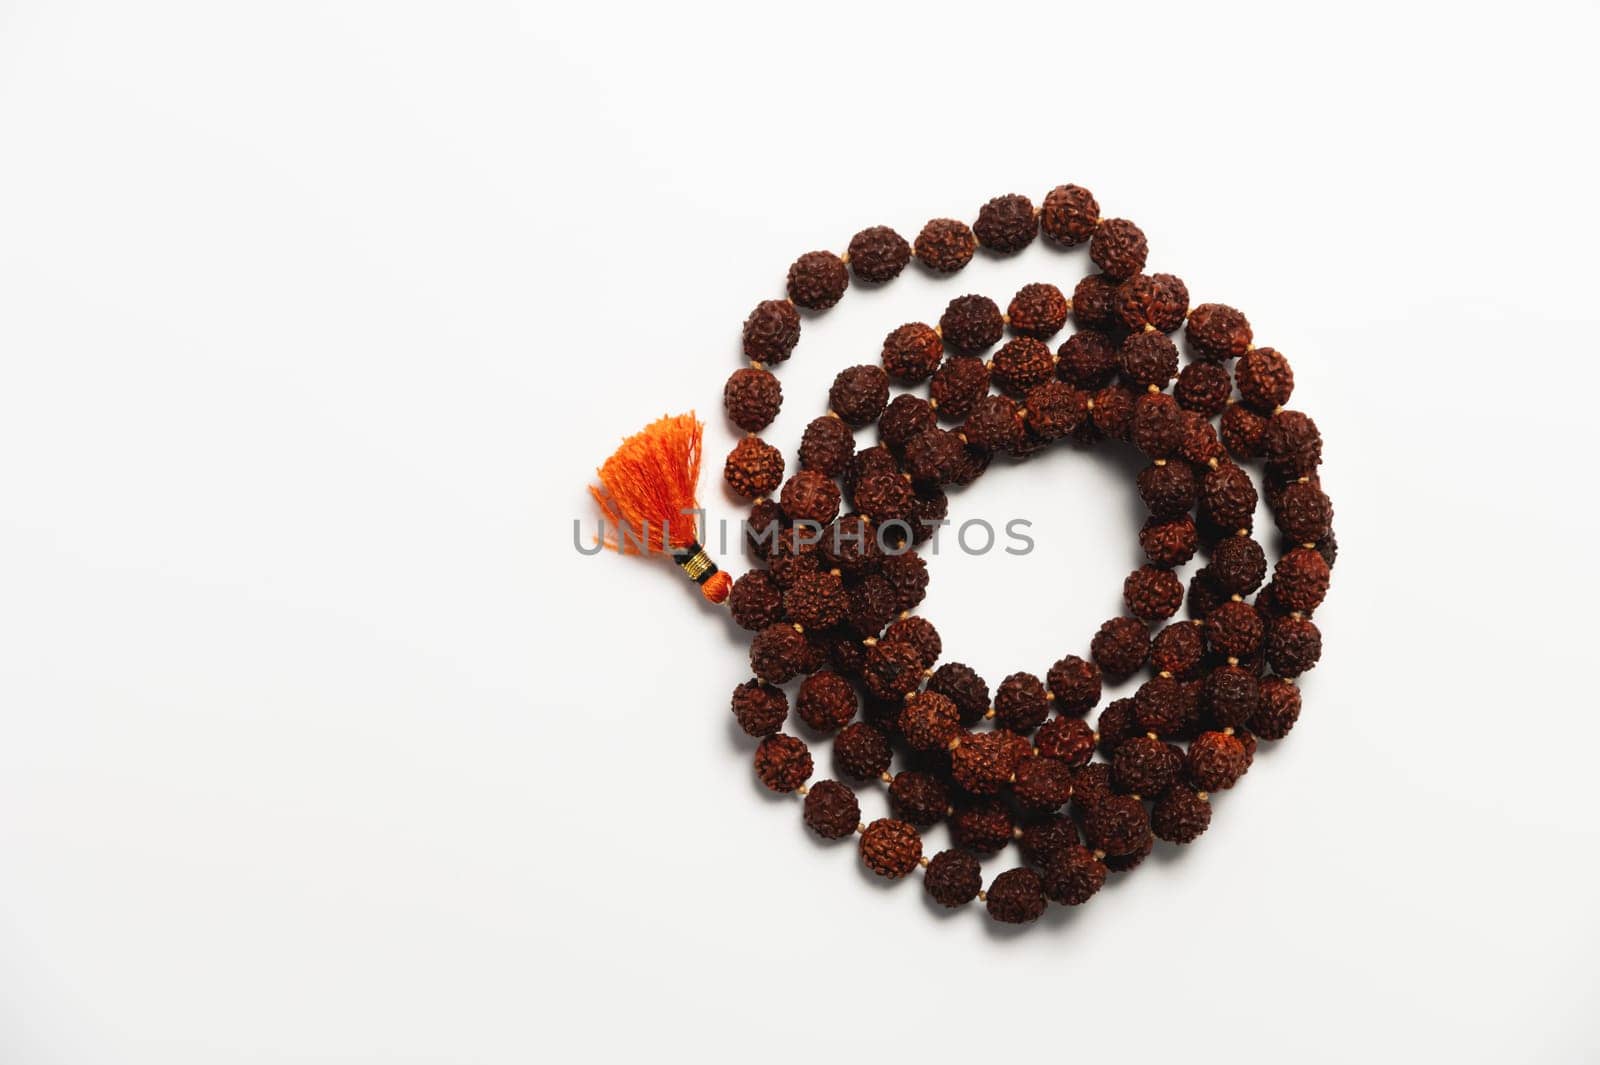 Wooden church rosary made of dark wood on a white background. Church rosary for prayer close-up by yanik88